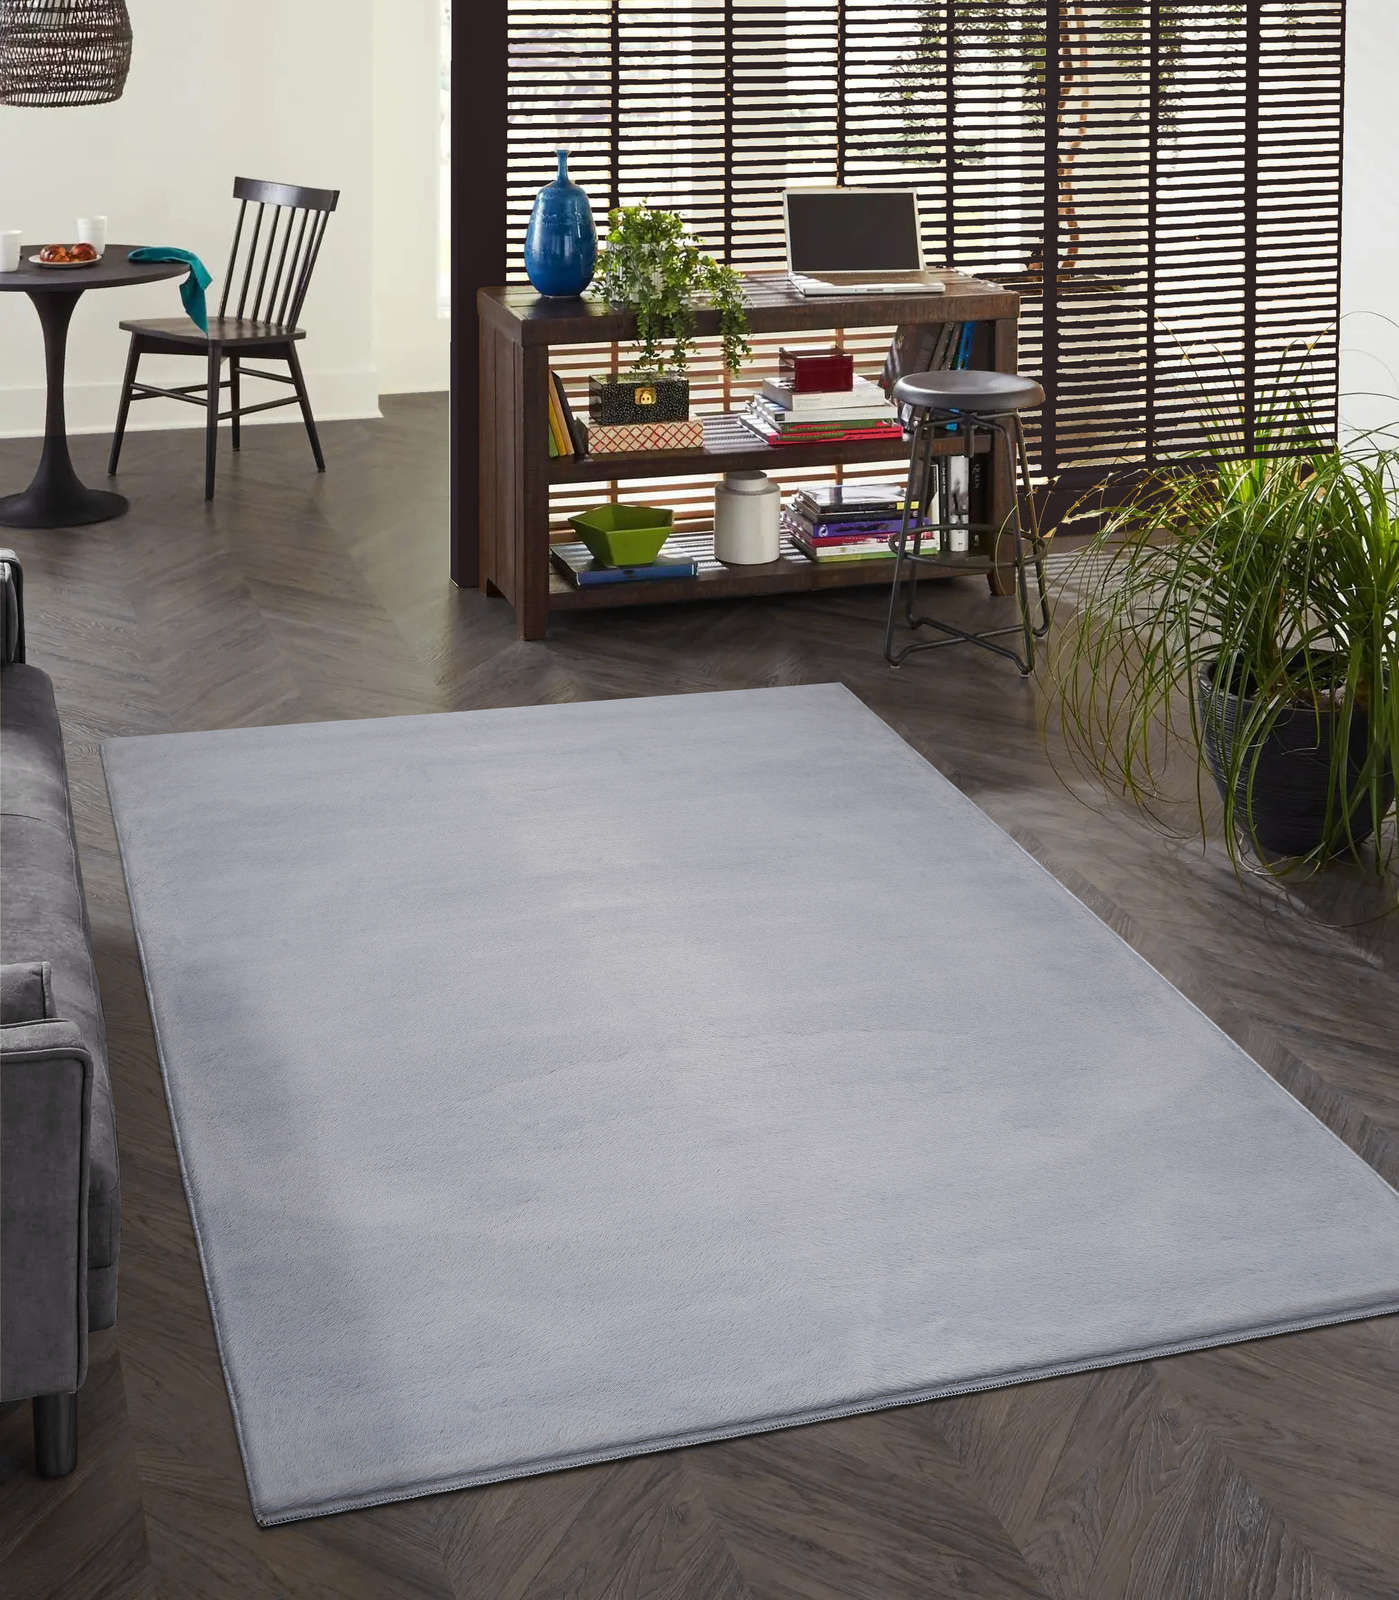             Comfortable high pile carpet in soft grey - 220 x 160 cm
        